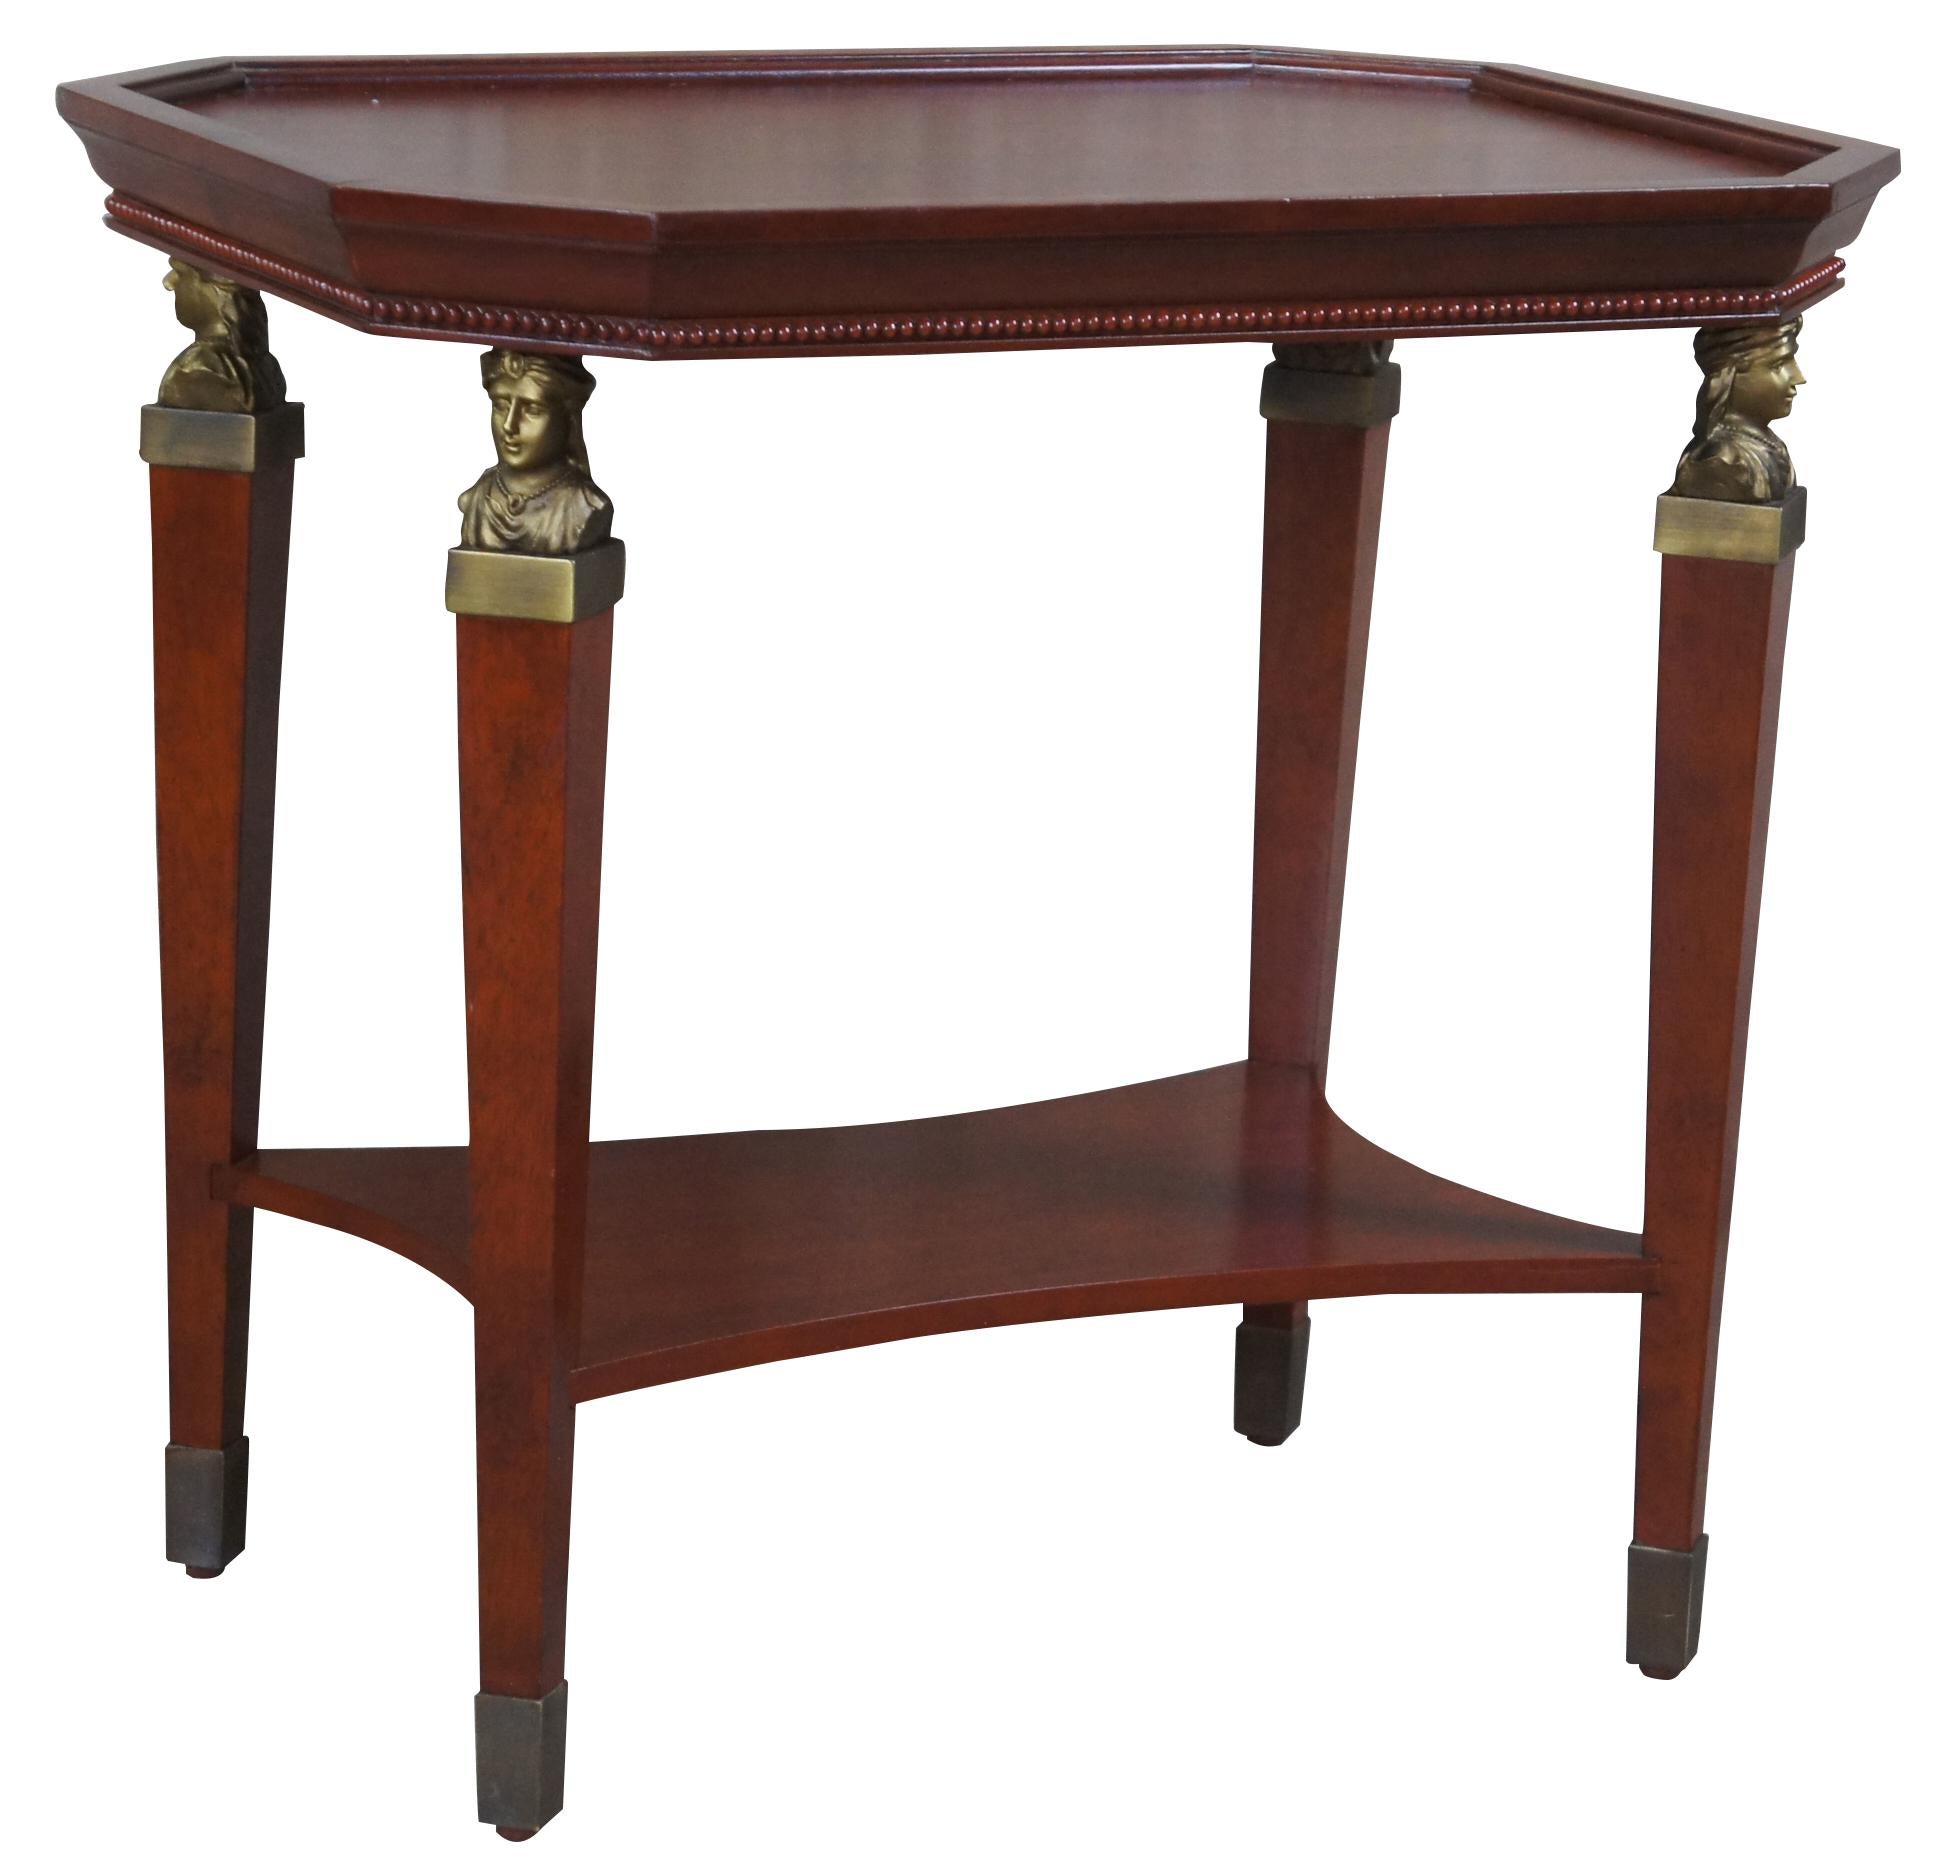 Bombay Company Egyptian revival end table. Made from cherry with an octagon shape inset top and beeded trim. The table is supported by square tapered legs topped with glowing figural brass caryatid mounts. Legs terminate into brass capped feet.
 